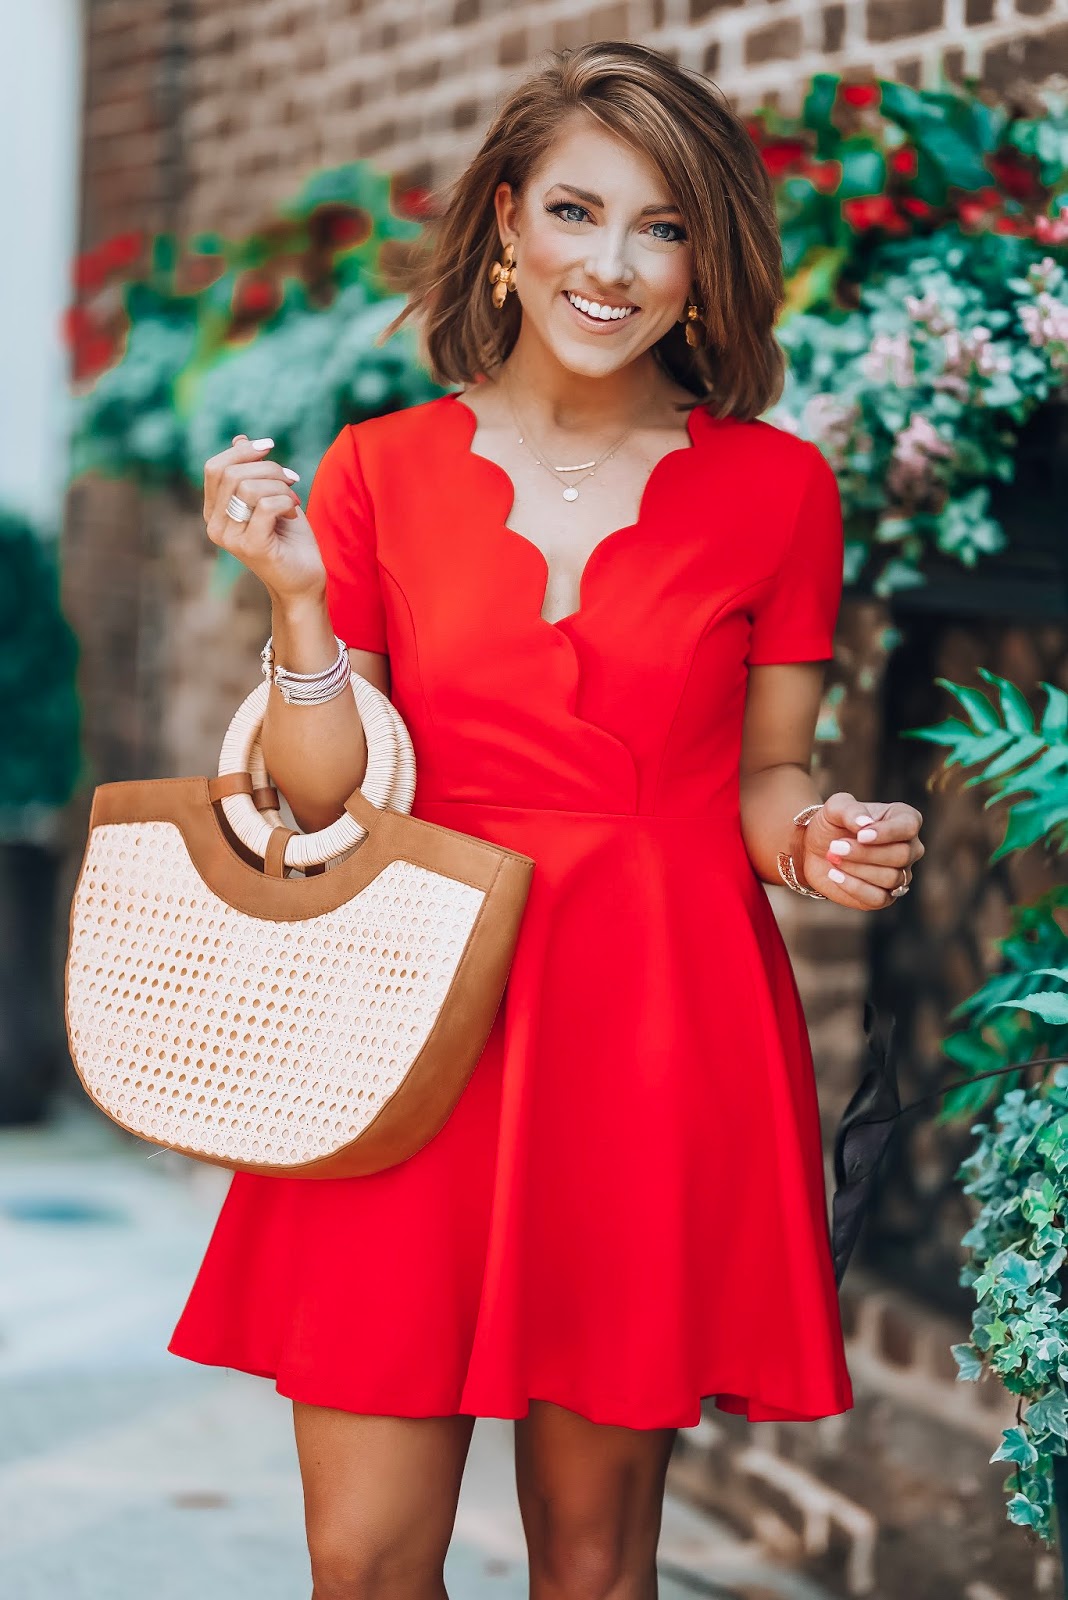 Under $60 Scallop Red Dress in Charleston + Target Style Straw Bag - Something Delightful Blog #springstyle